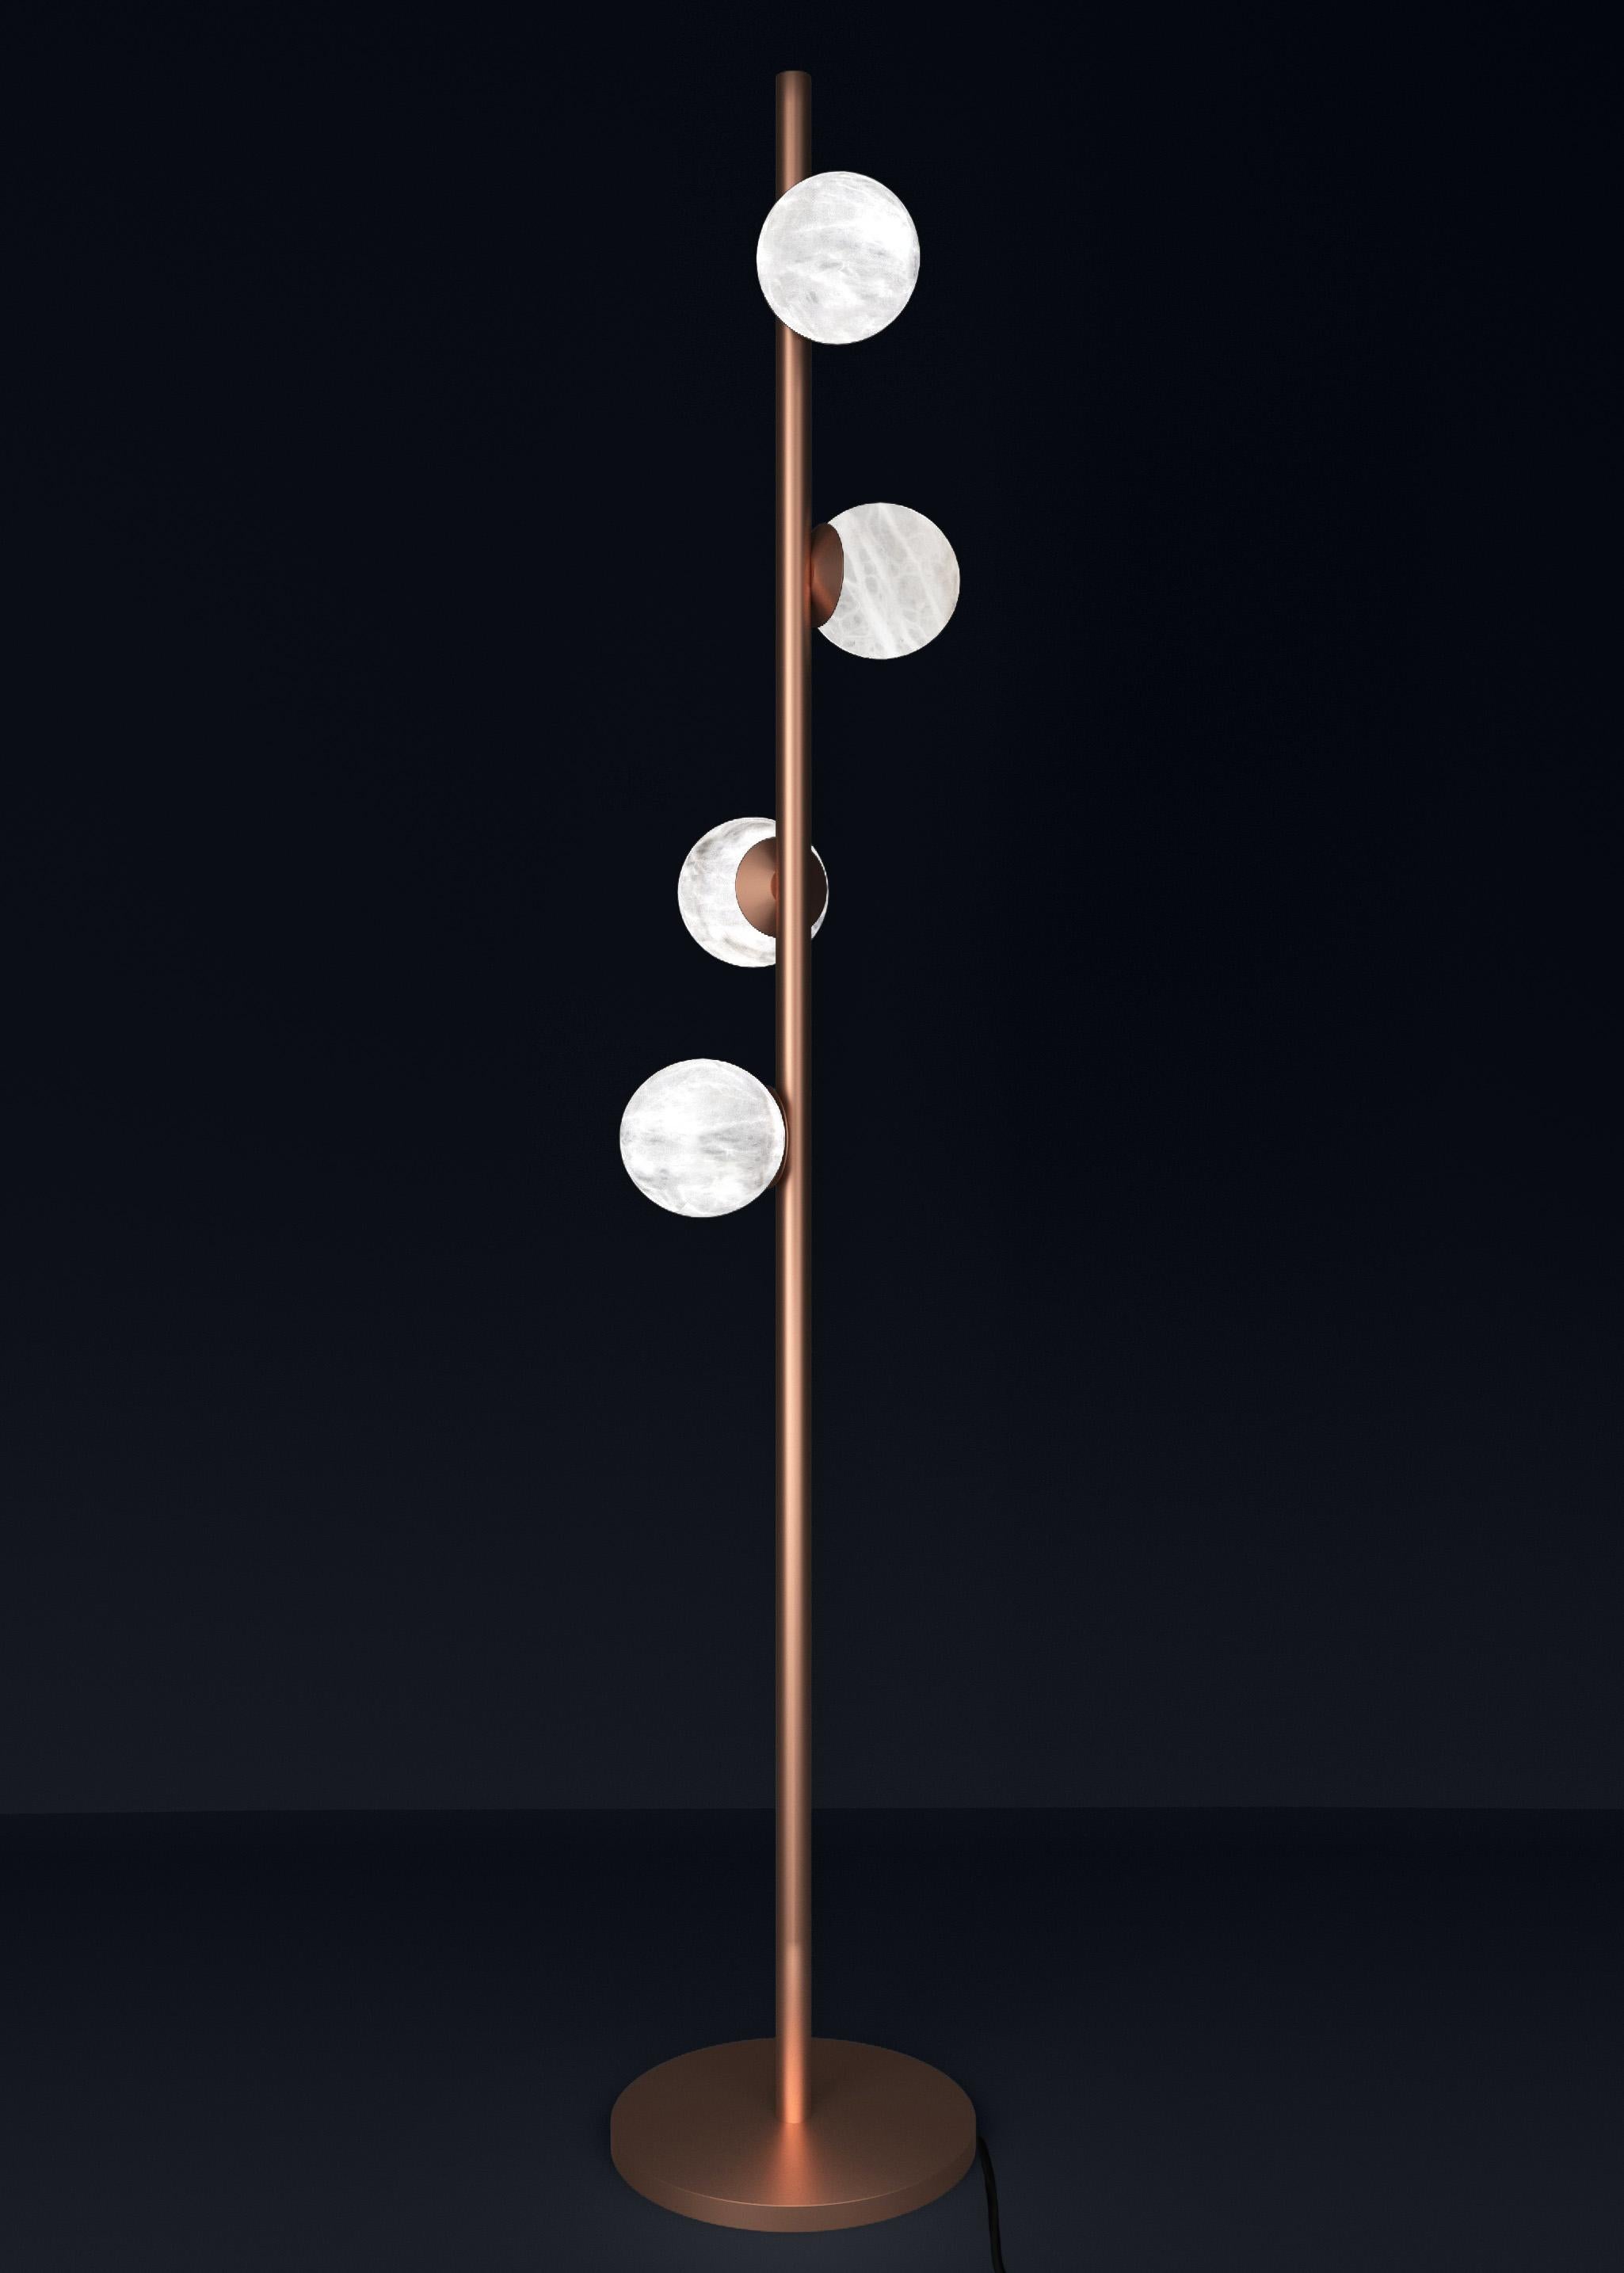 Ofione Copper Floor Lamp by Alabastro Italiano
Dimensions: D 50 x W 50 x H 170 cm.
Materials: White alabaster and copper.

Available in different finishes: Shiny Silver, Bronze, Brushed Brass, Matte Black, Ruggine of Florence, Brushed Burnished,